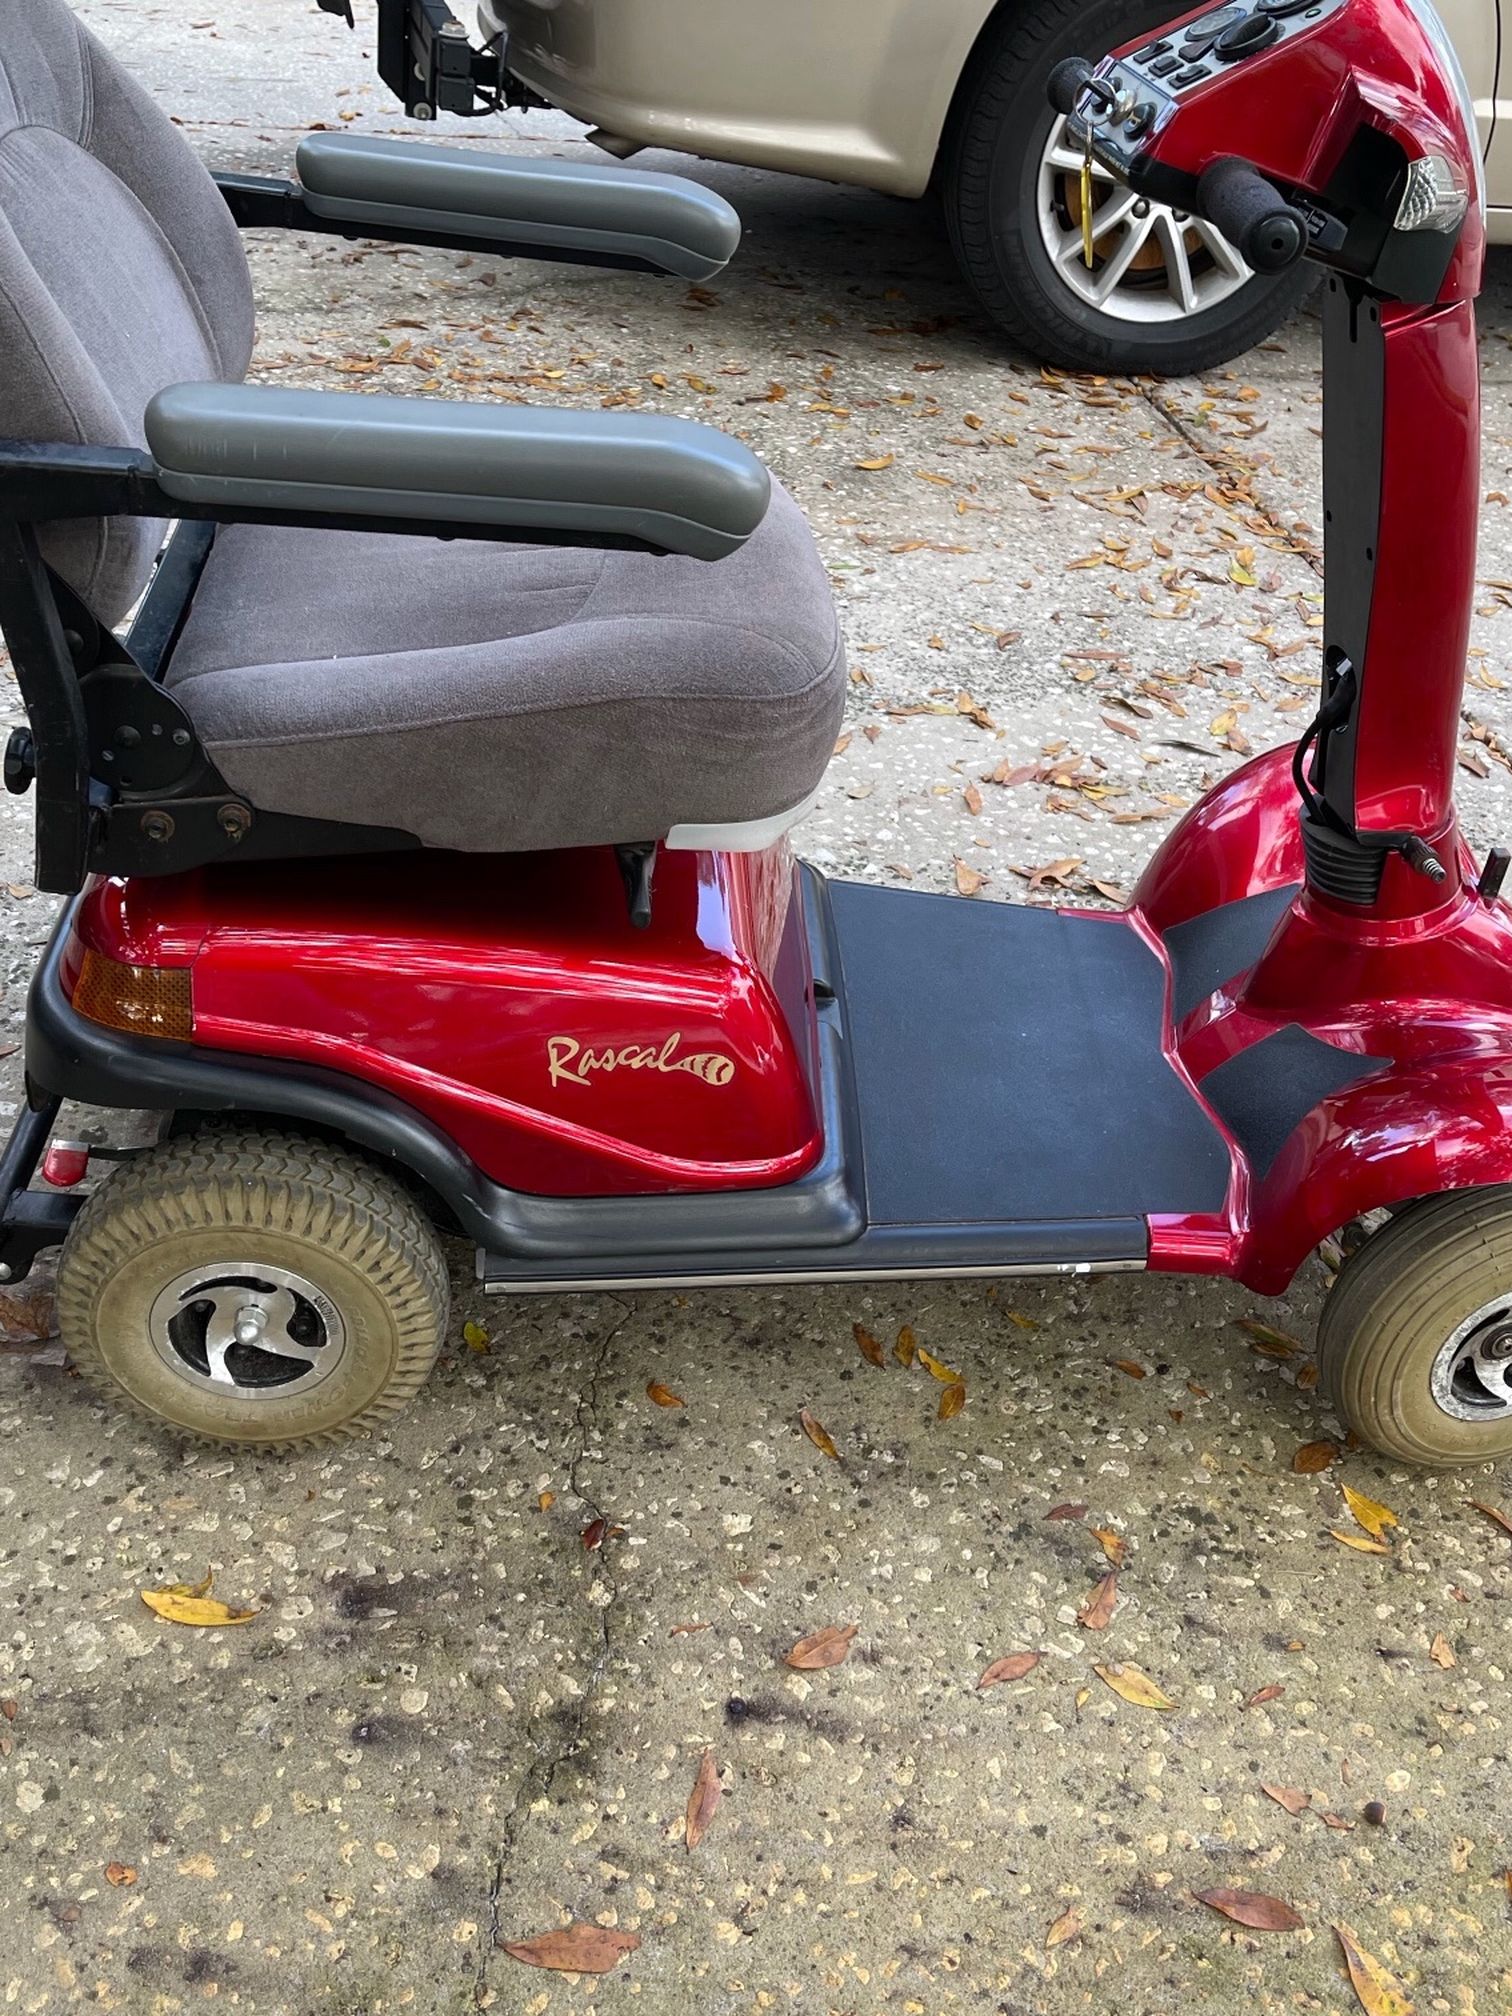 Rascal 300 4 Wheel Scooter , New Batteries , Very Well Cared For, Super Clean